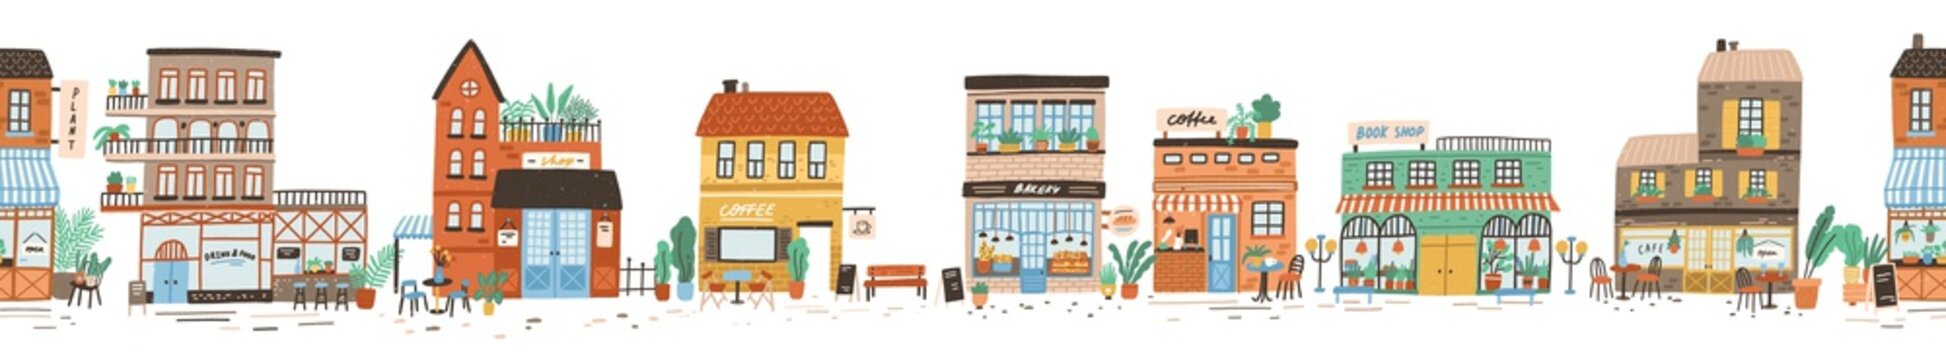 Urban landscape or view of European city street with stores, shops, sidewalk cafe, restaurant, bakery, coffee house. Seamless banner with building facades. Flat vector illustration in cute style.